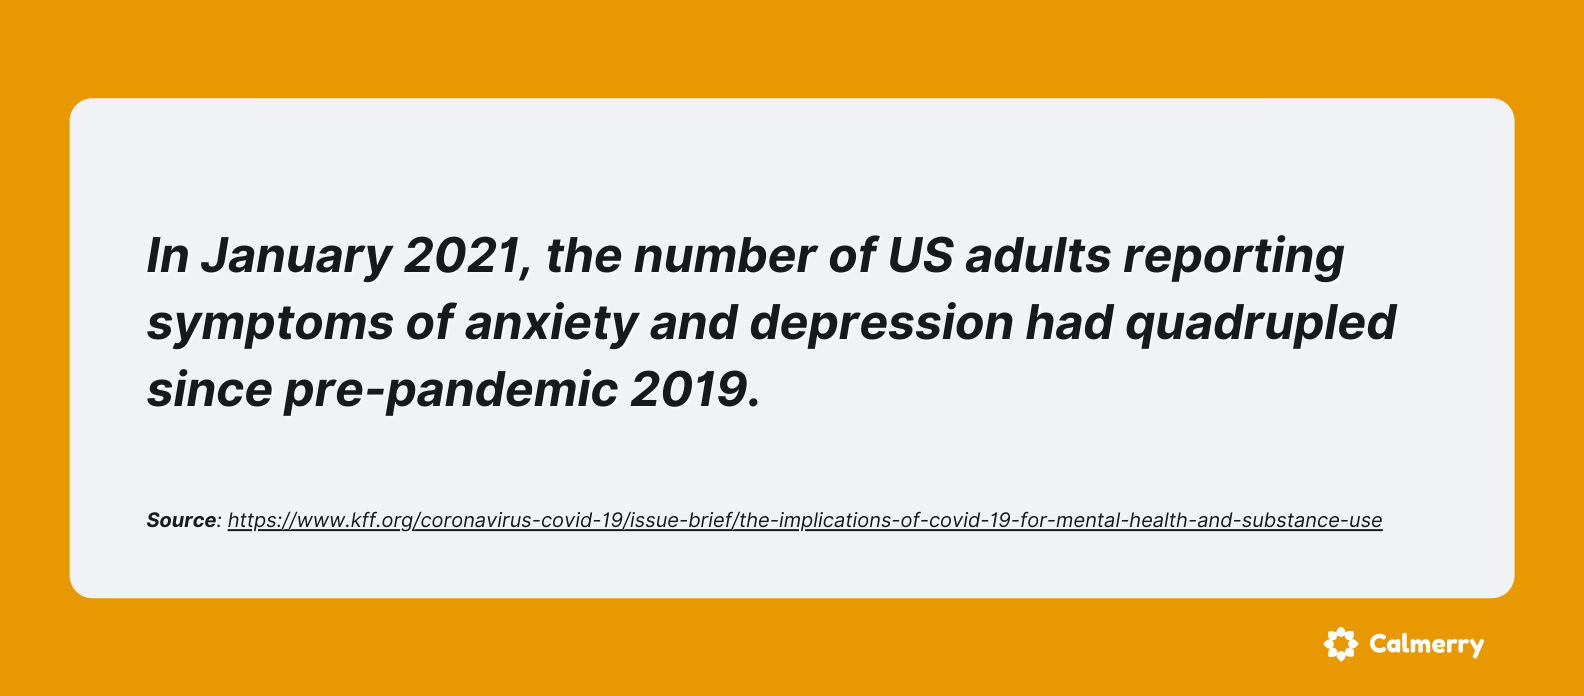 In January 2021, the number of US adults reporting symptoms of anxiety and depression had quadrupled since pre-pandemic 2019. 